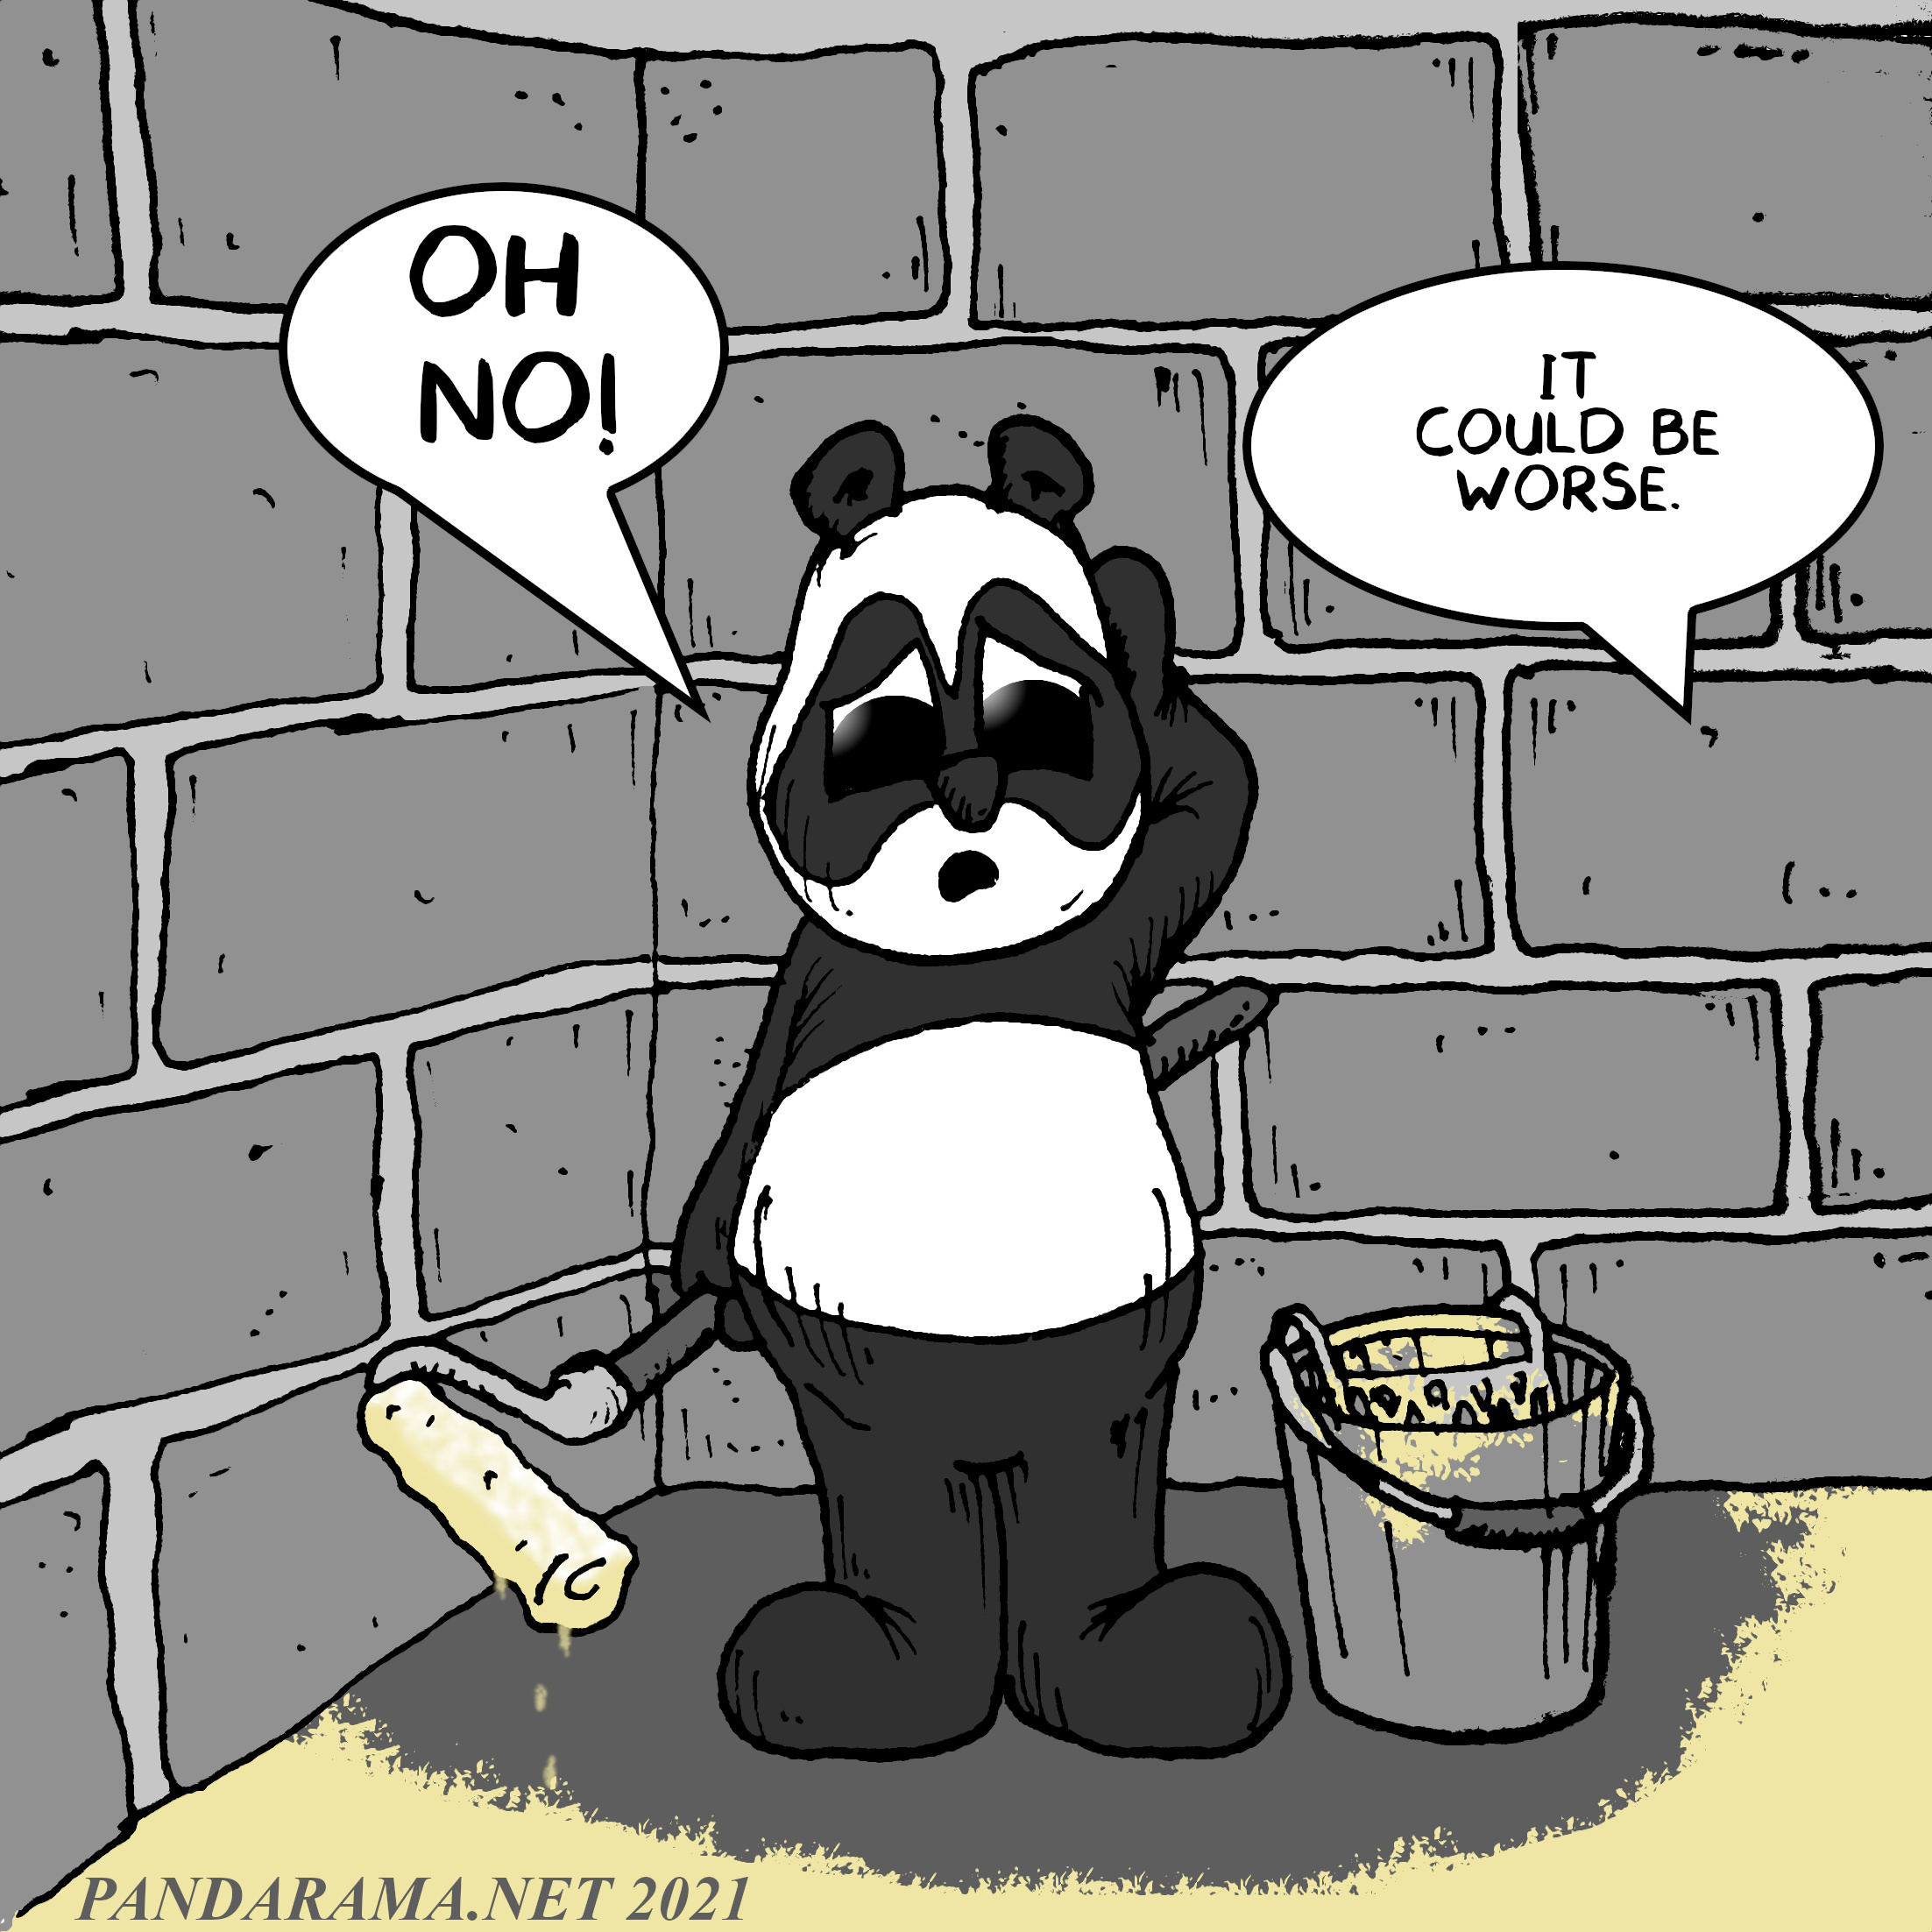 panda is distressed because it's painted itself into a corner, but a panda who bricked itself behind a wall says 'it could be worse'.